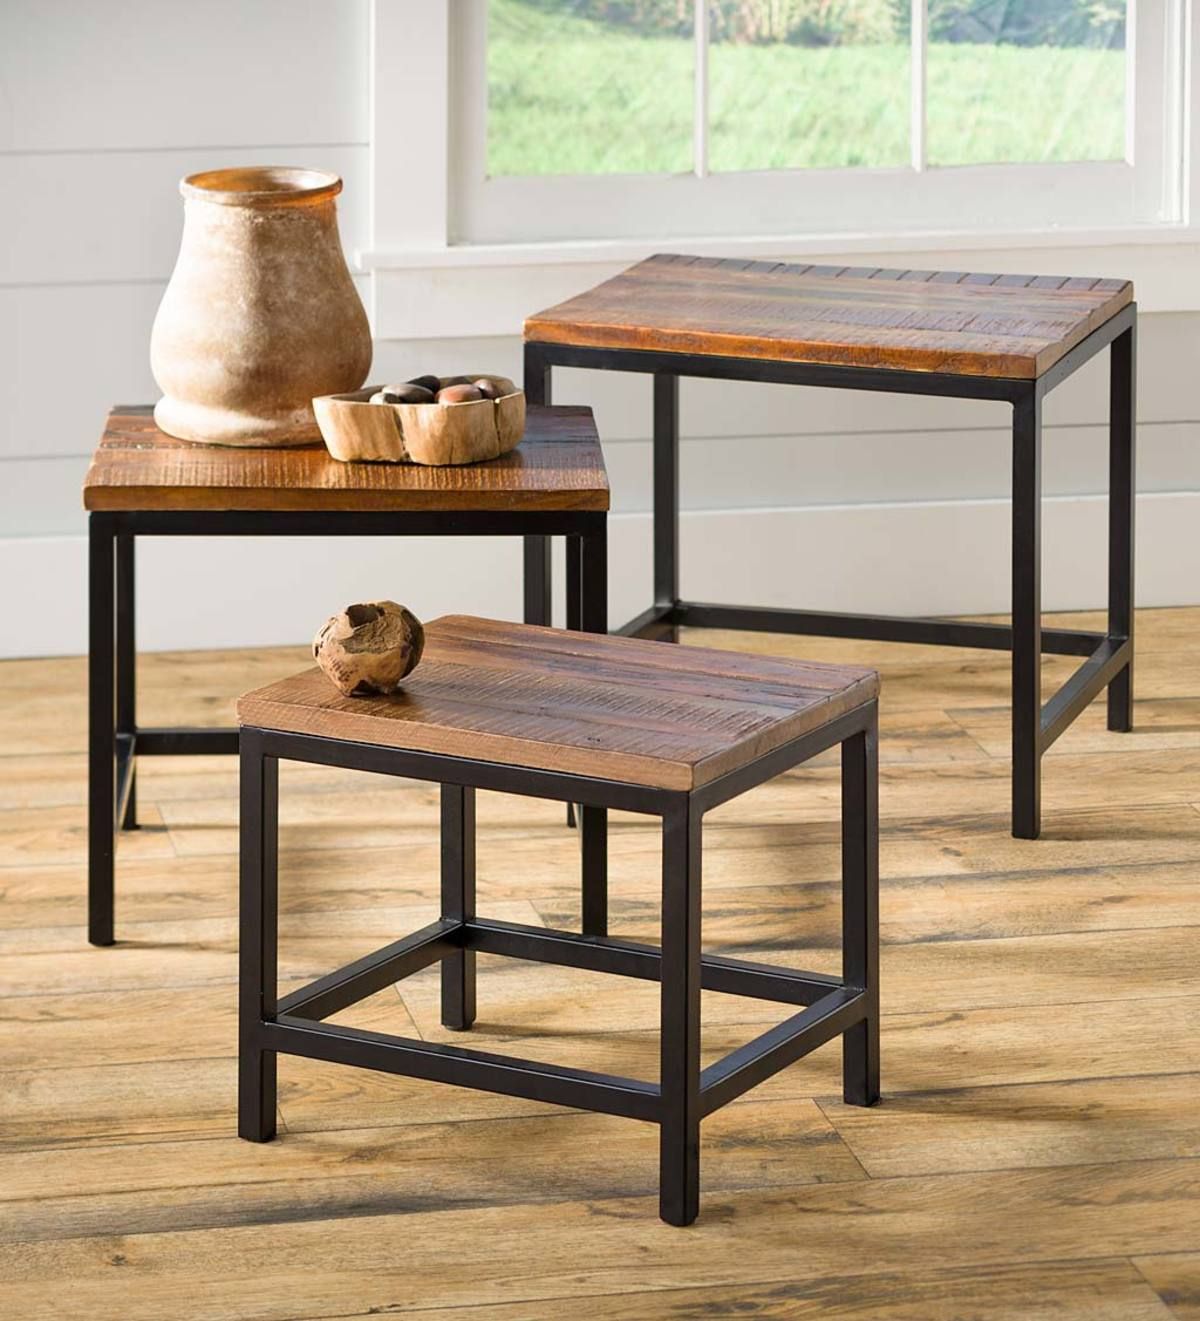 Allegheny Reclaimed Wood Nesting Tables, Set Of 3 | Plow & Hearth Pertaining To Coffee Tables Of 3 Nesting Tables (View 10 of 20)